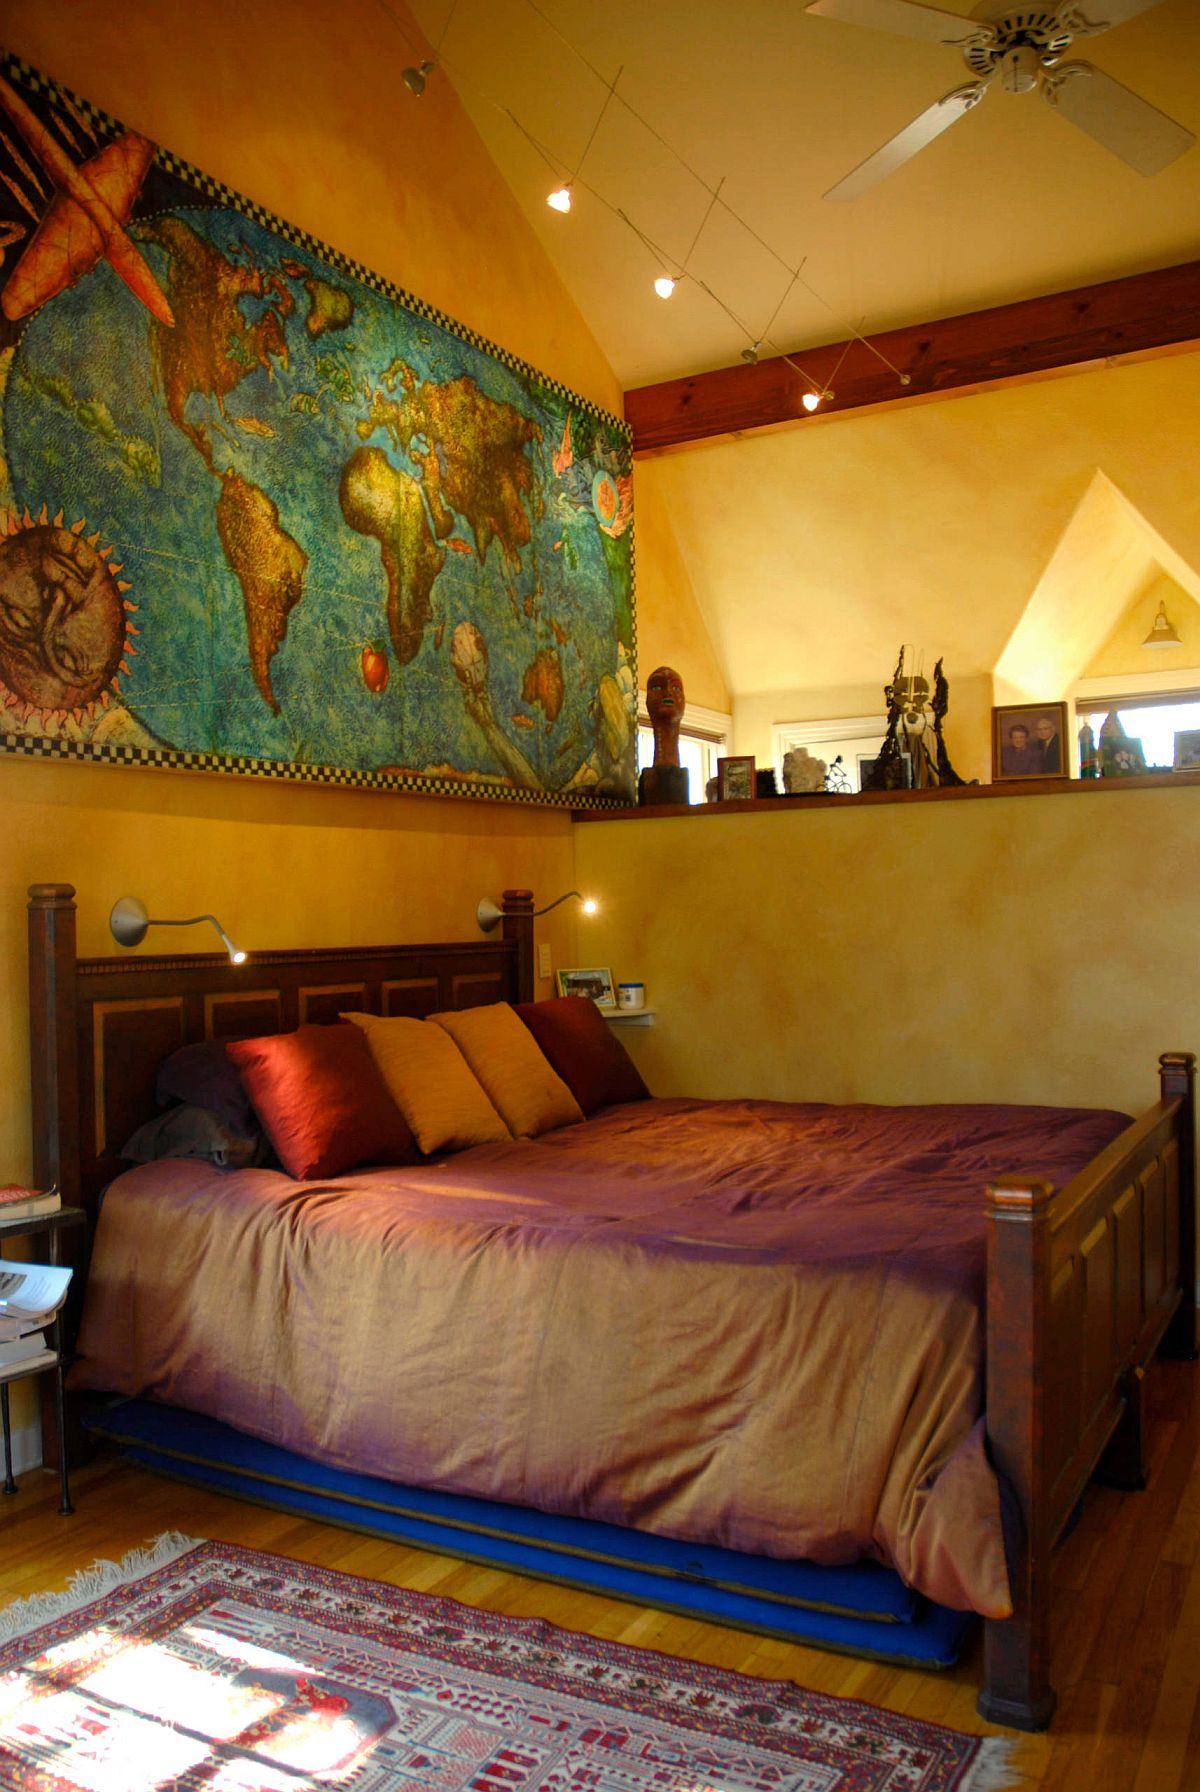 Cozy-and-colorful-bedroom-with-Mediterranean-style-and-textured-walls-in-yellow-34073